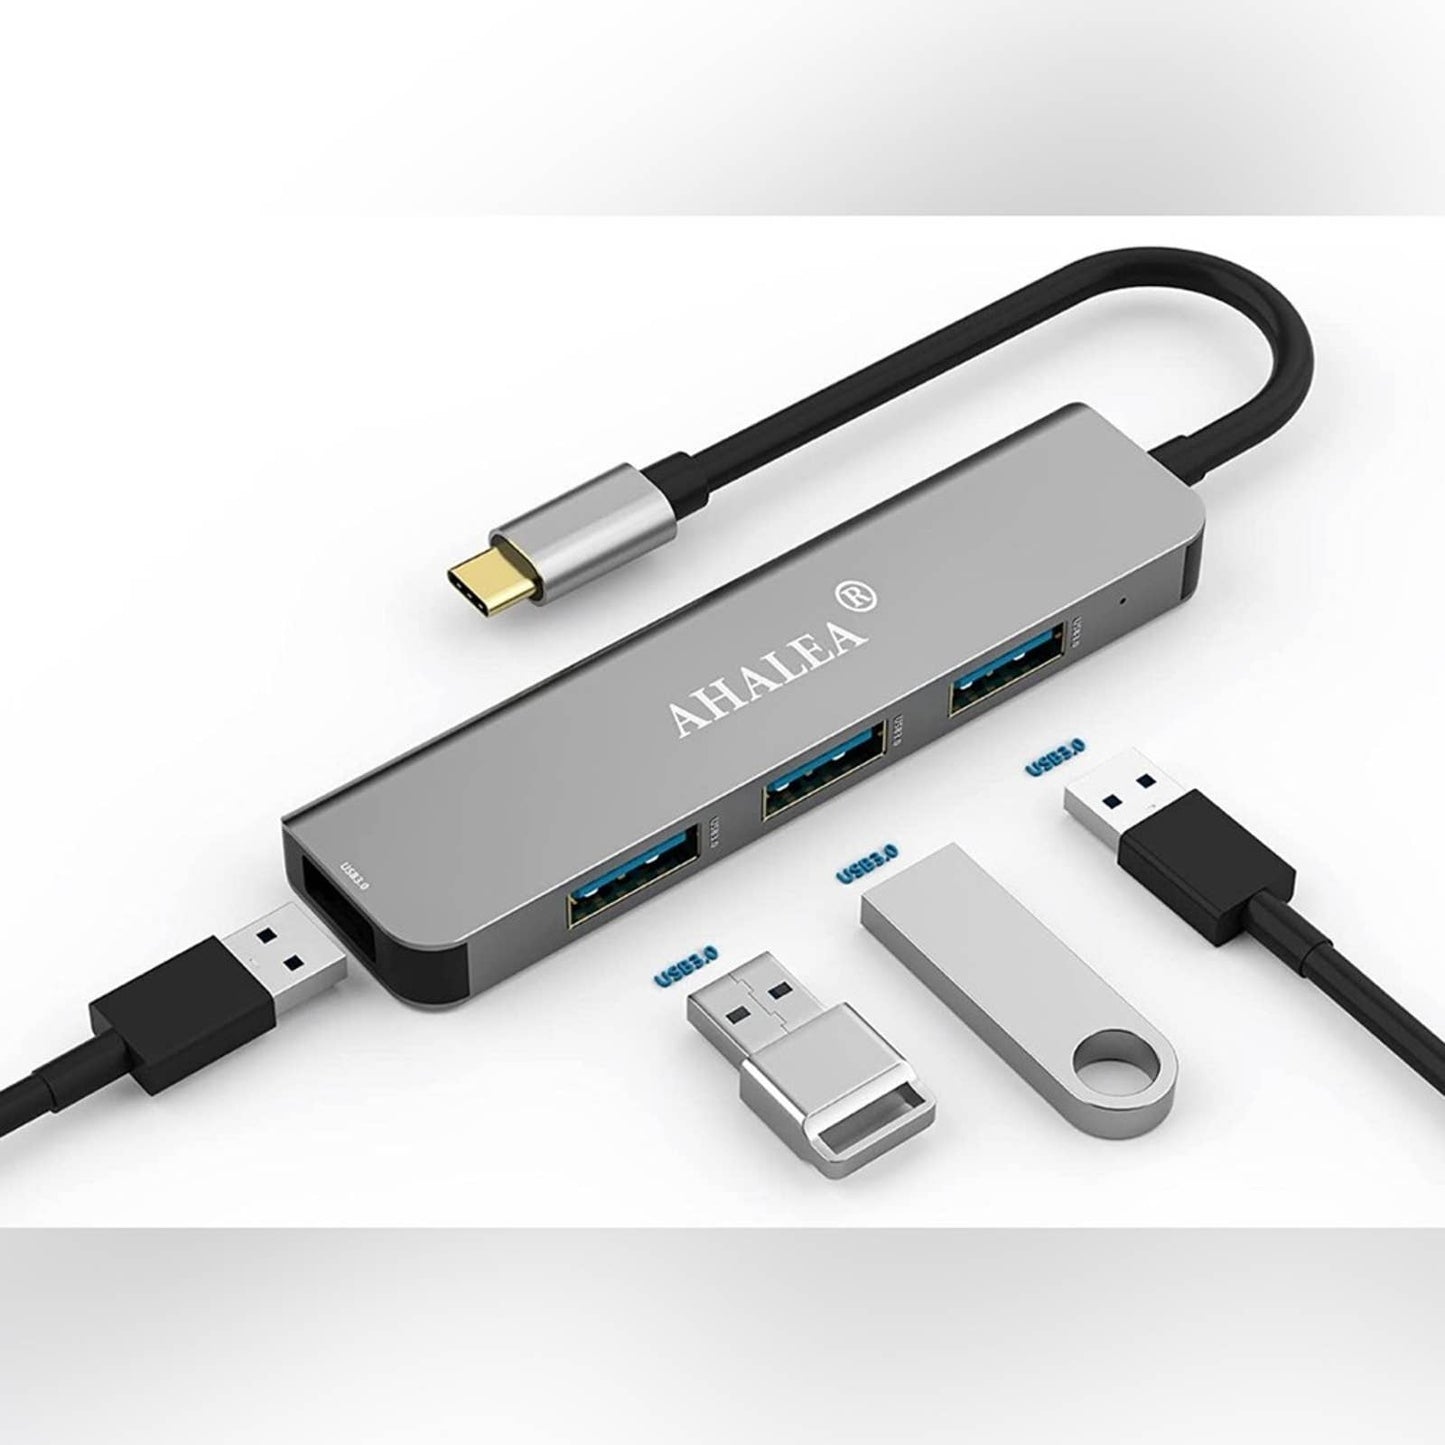 USB C Hub Docking Station with 4 USB Ports Working for Windows and MacBook Pro